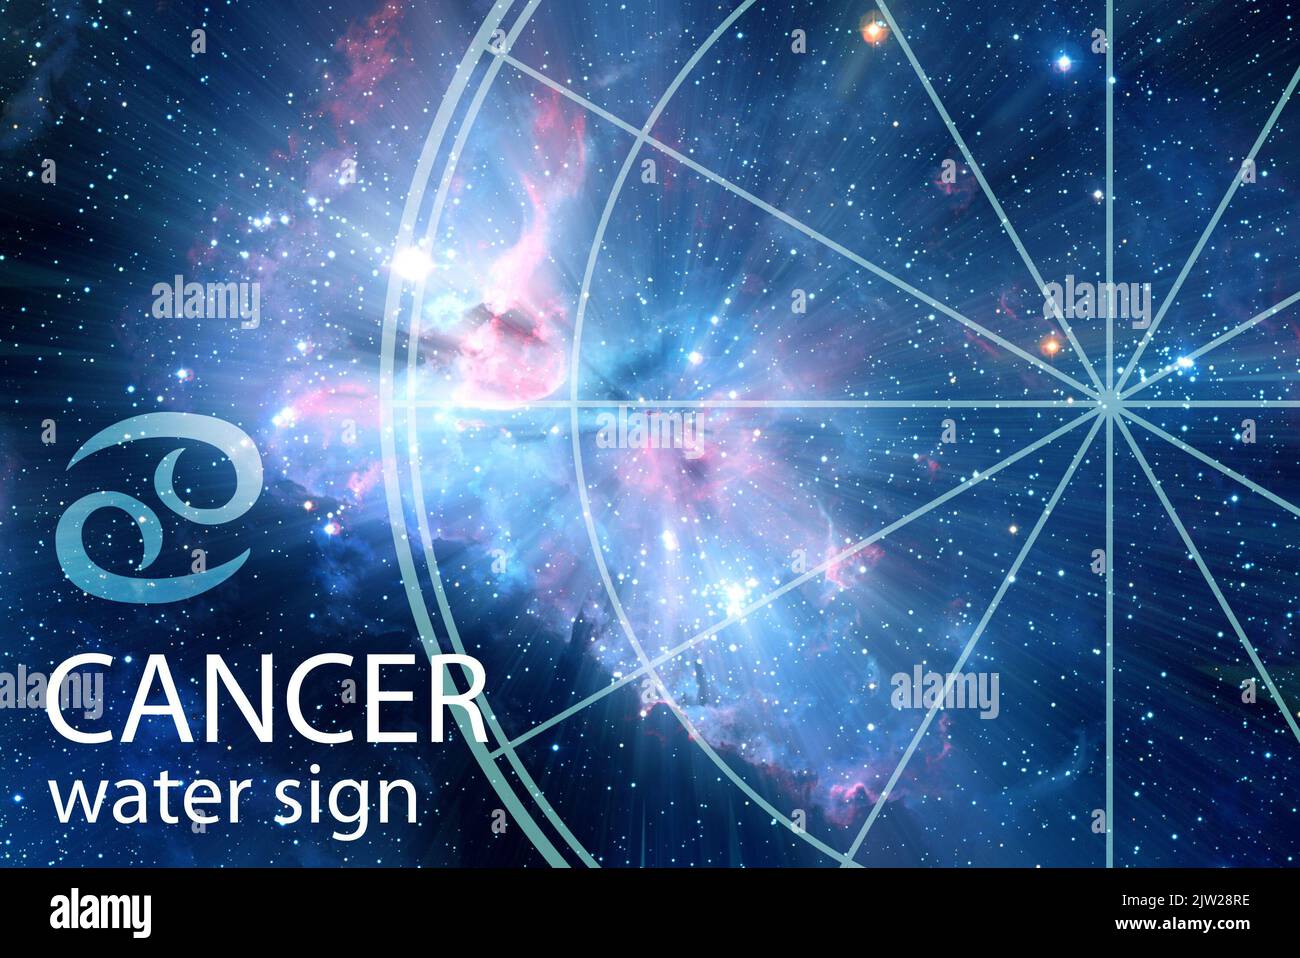 astrology symbol of the zodiac sign of Cancer Stock Photo